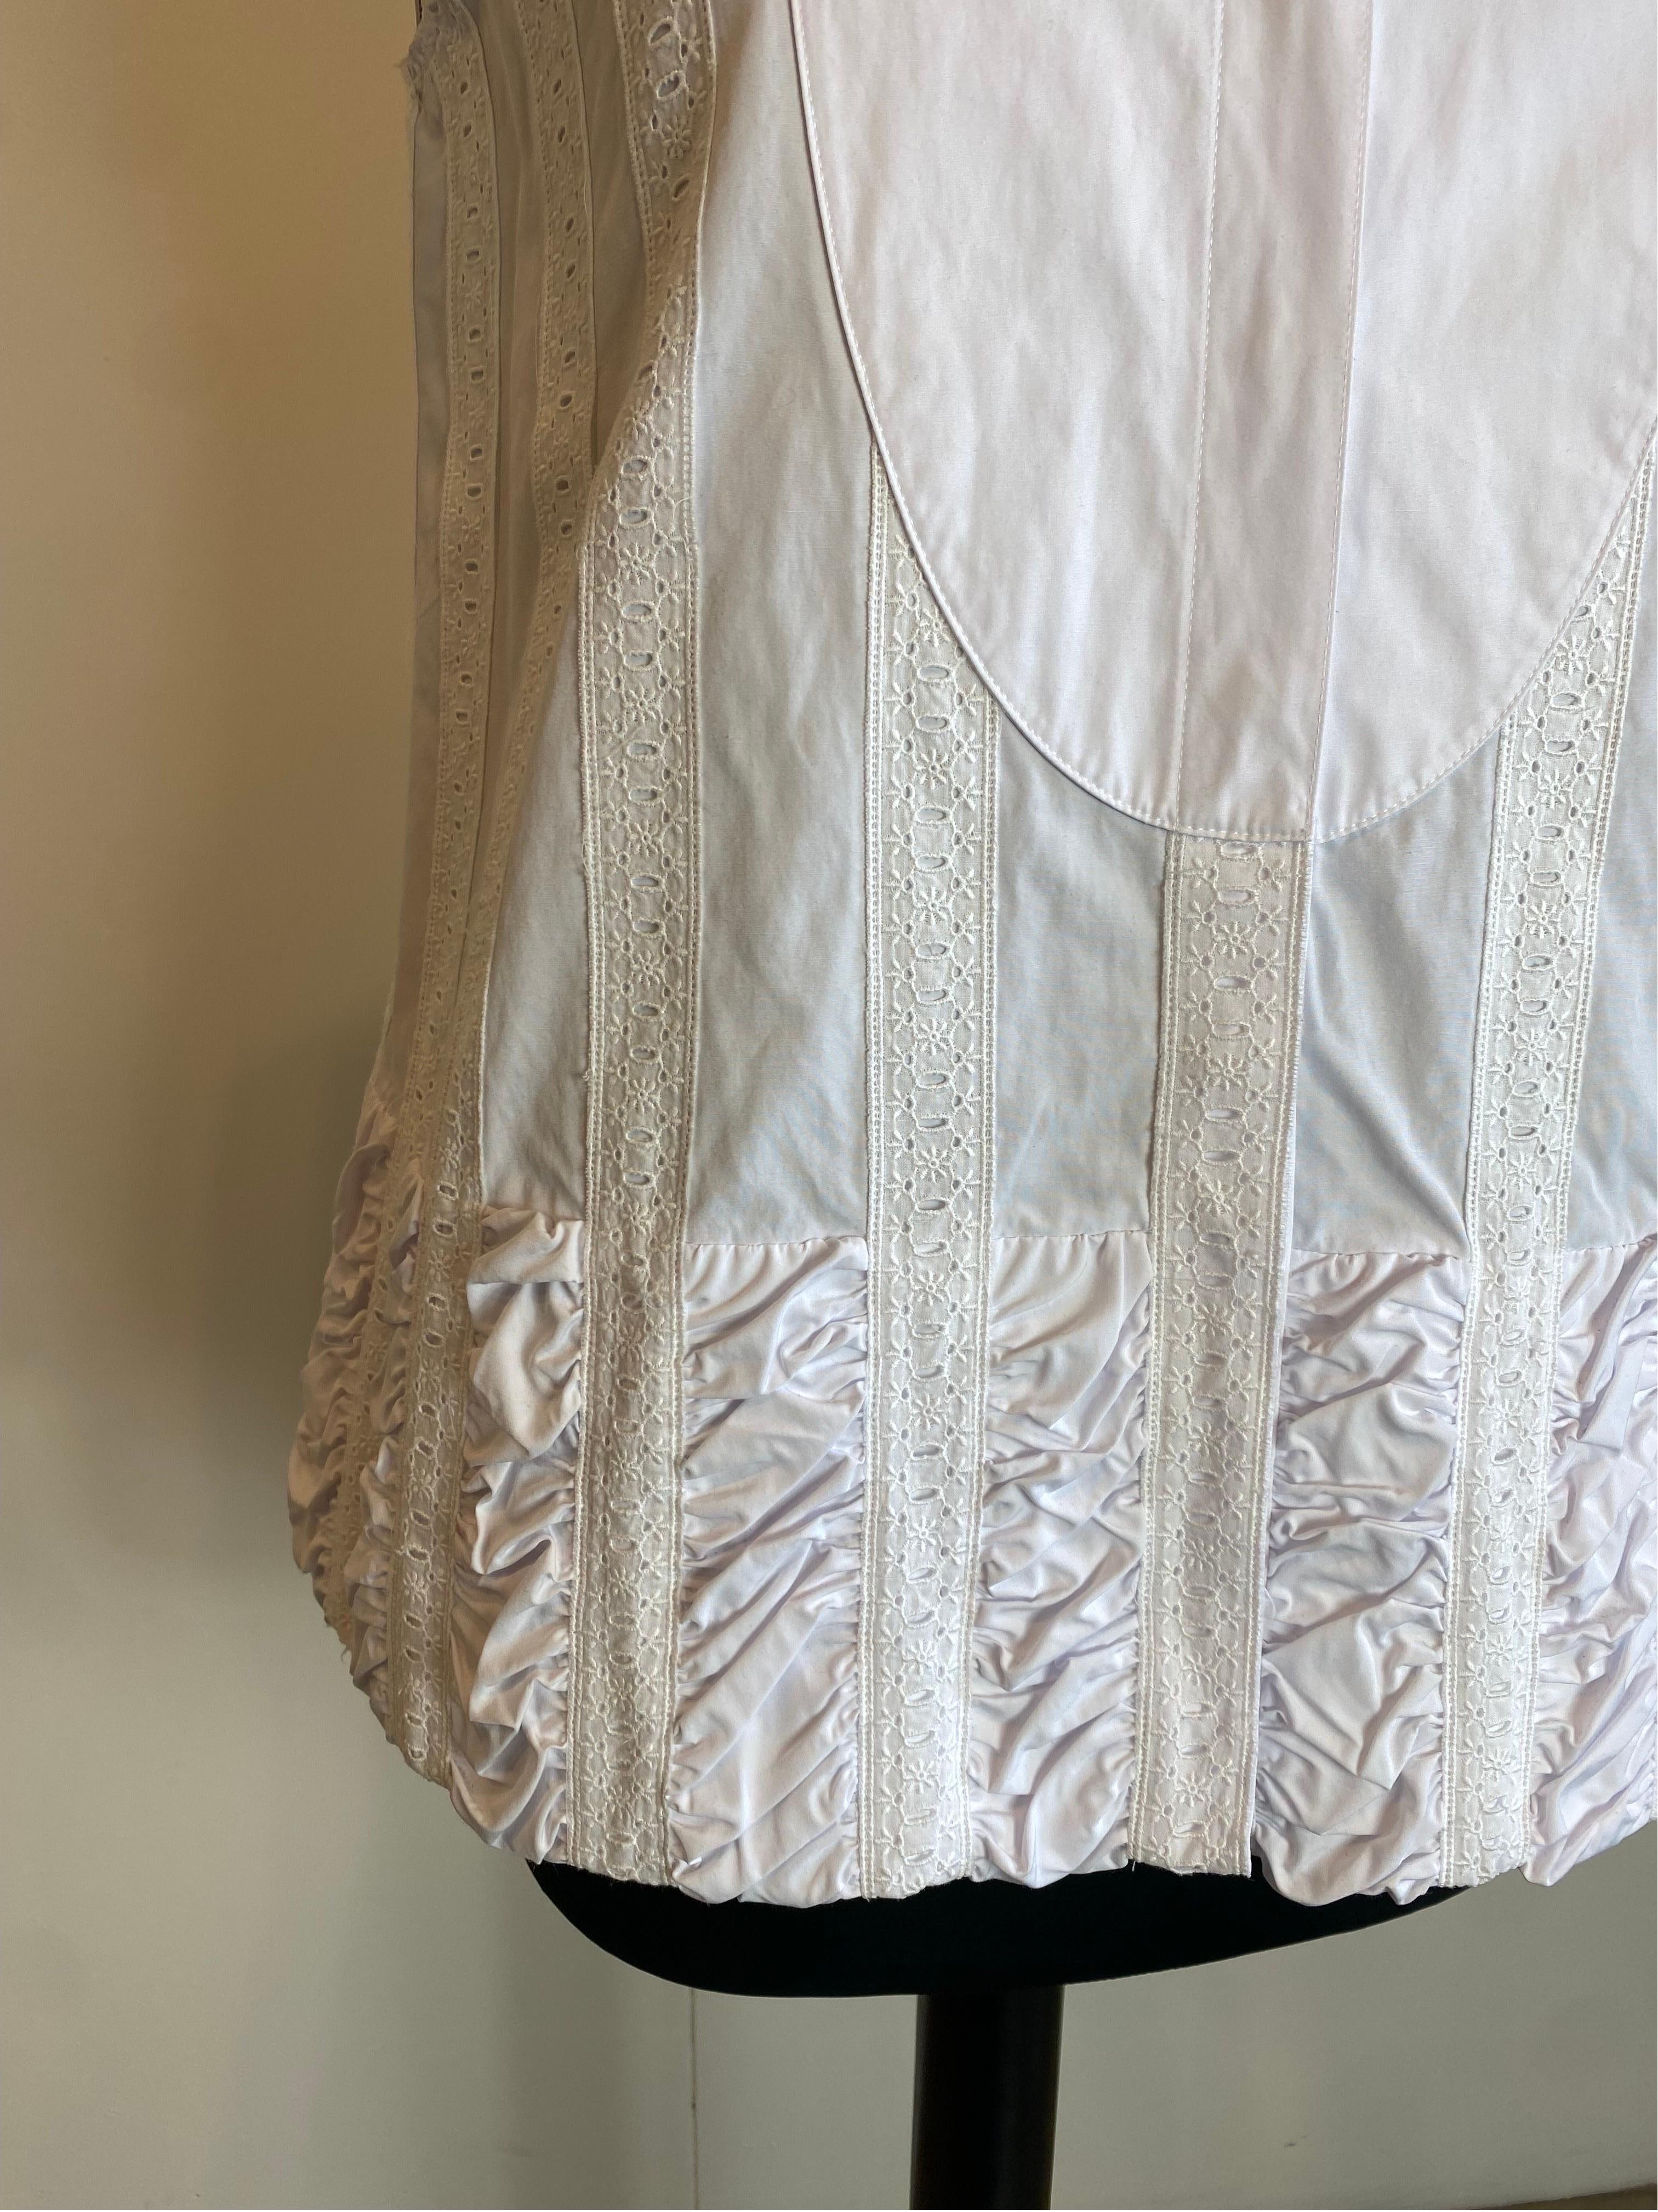 Alaia Paris White Blouse  In Excellent Condition For Sale In Carnate, IT